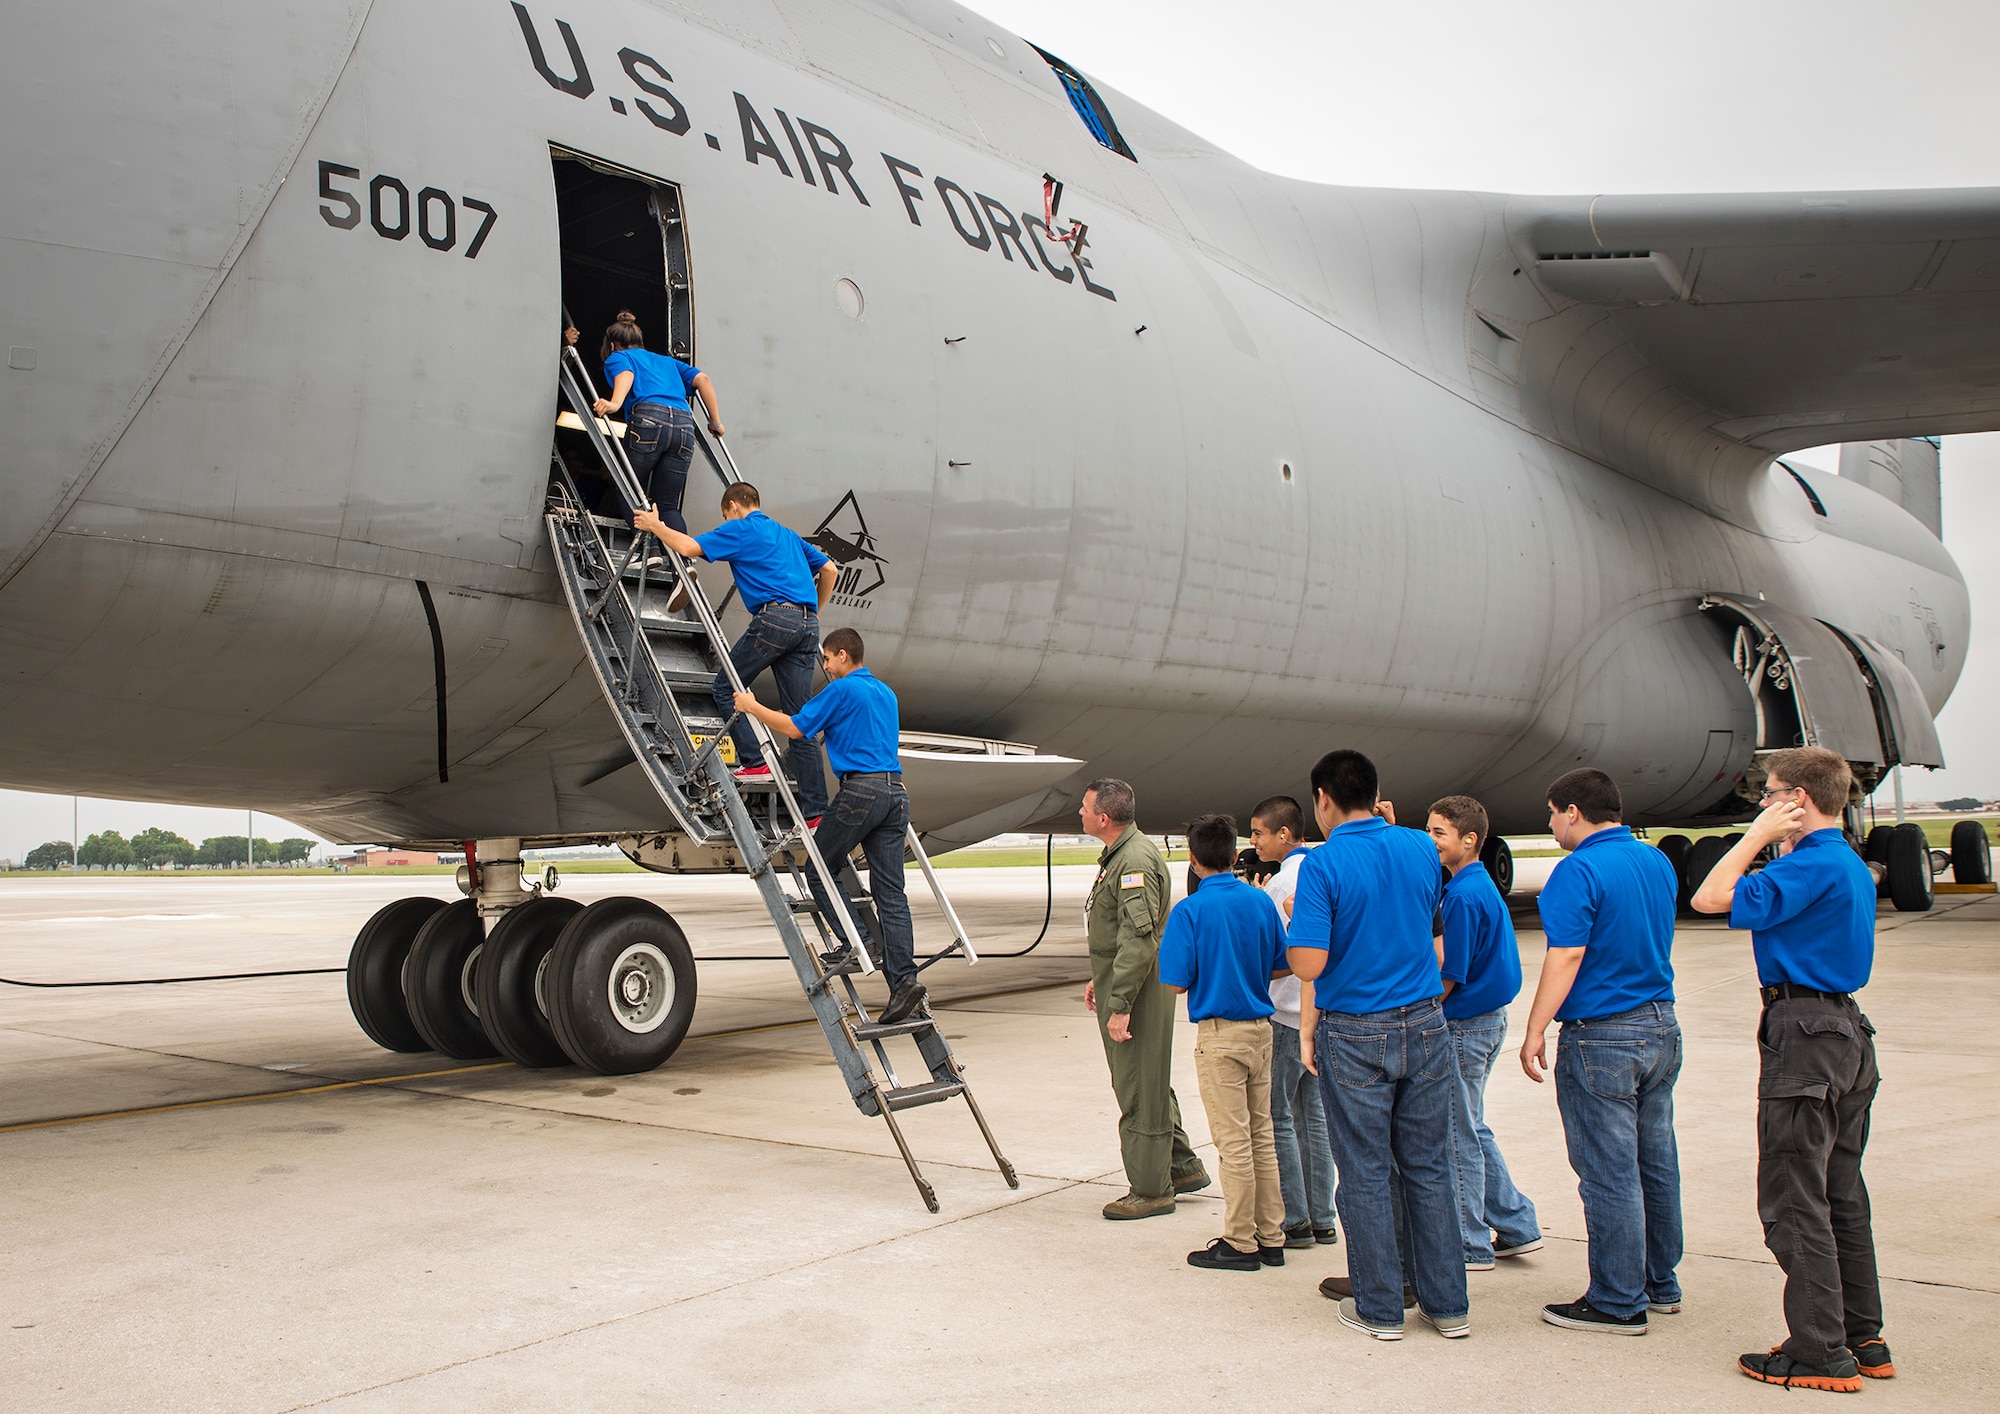 Junior ROTC students from John Jay High School climb into a C-5M Super Galaxy aircraft May 12, 2016 at Joint Base San Antonio-Lackland, Texas. The students toured the survival, engine, and structural engineering shops at the 433rd Airlift Wing and also saw a Military Working Dog demonstration at the 341st Training Squadron. (U.S. Air Force photo by Benjamin Faske) (released)